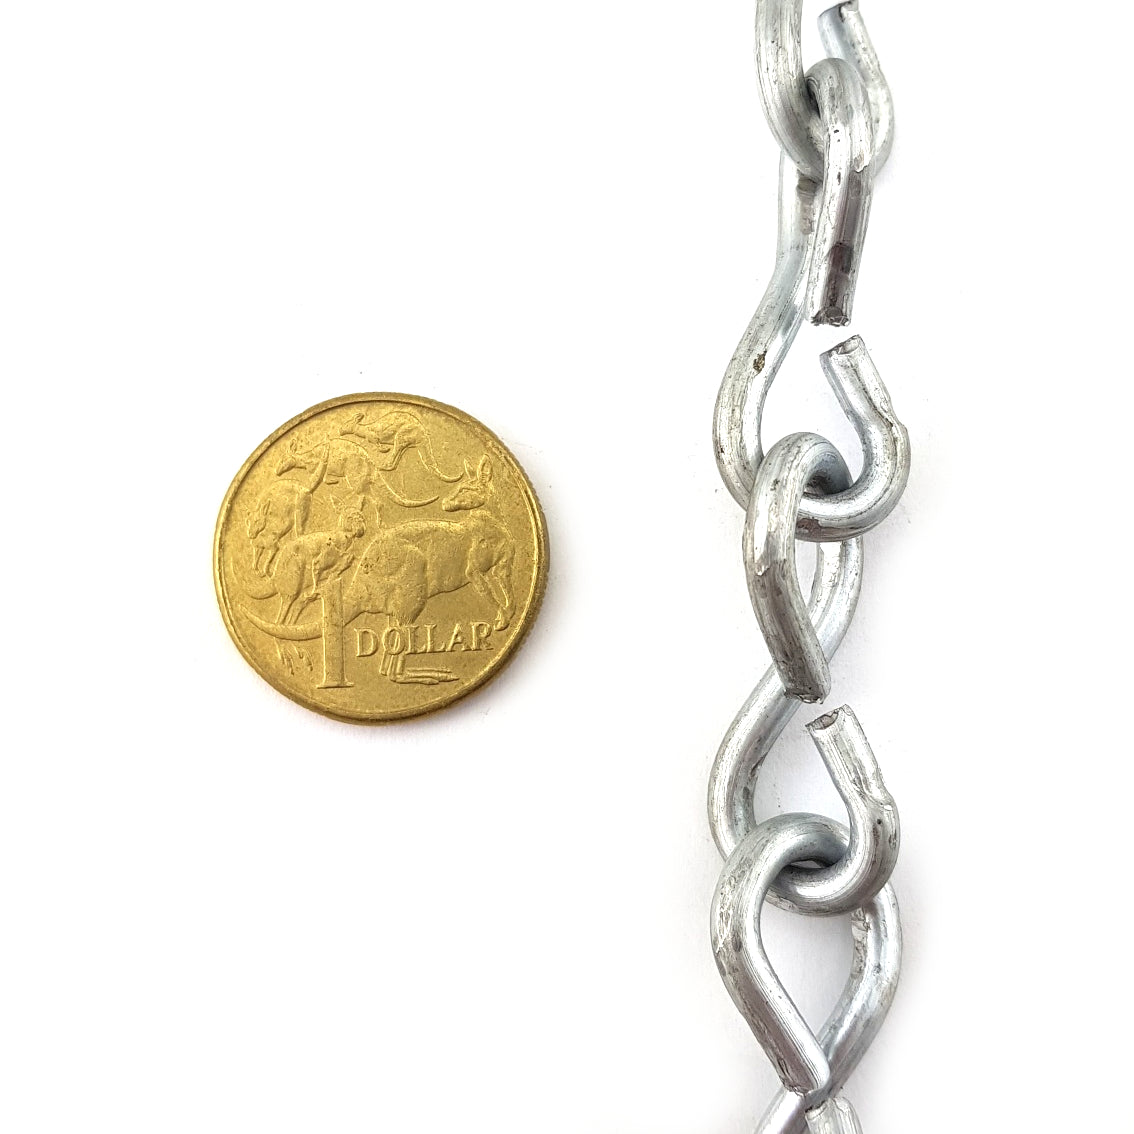 Australian made Single Jack Chain in galvanised finish, size 3.15mm and quantity of 30 metres. Melbourne, Australia.